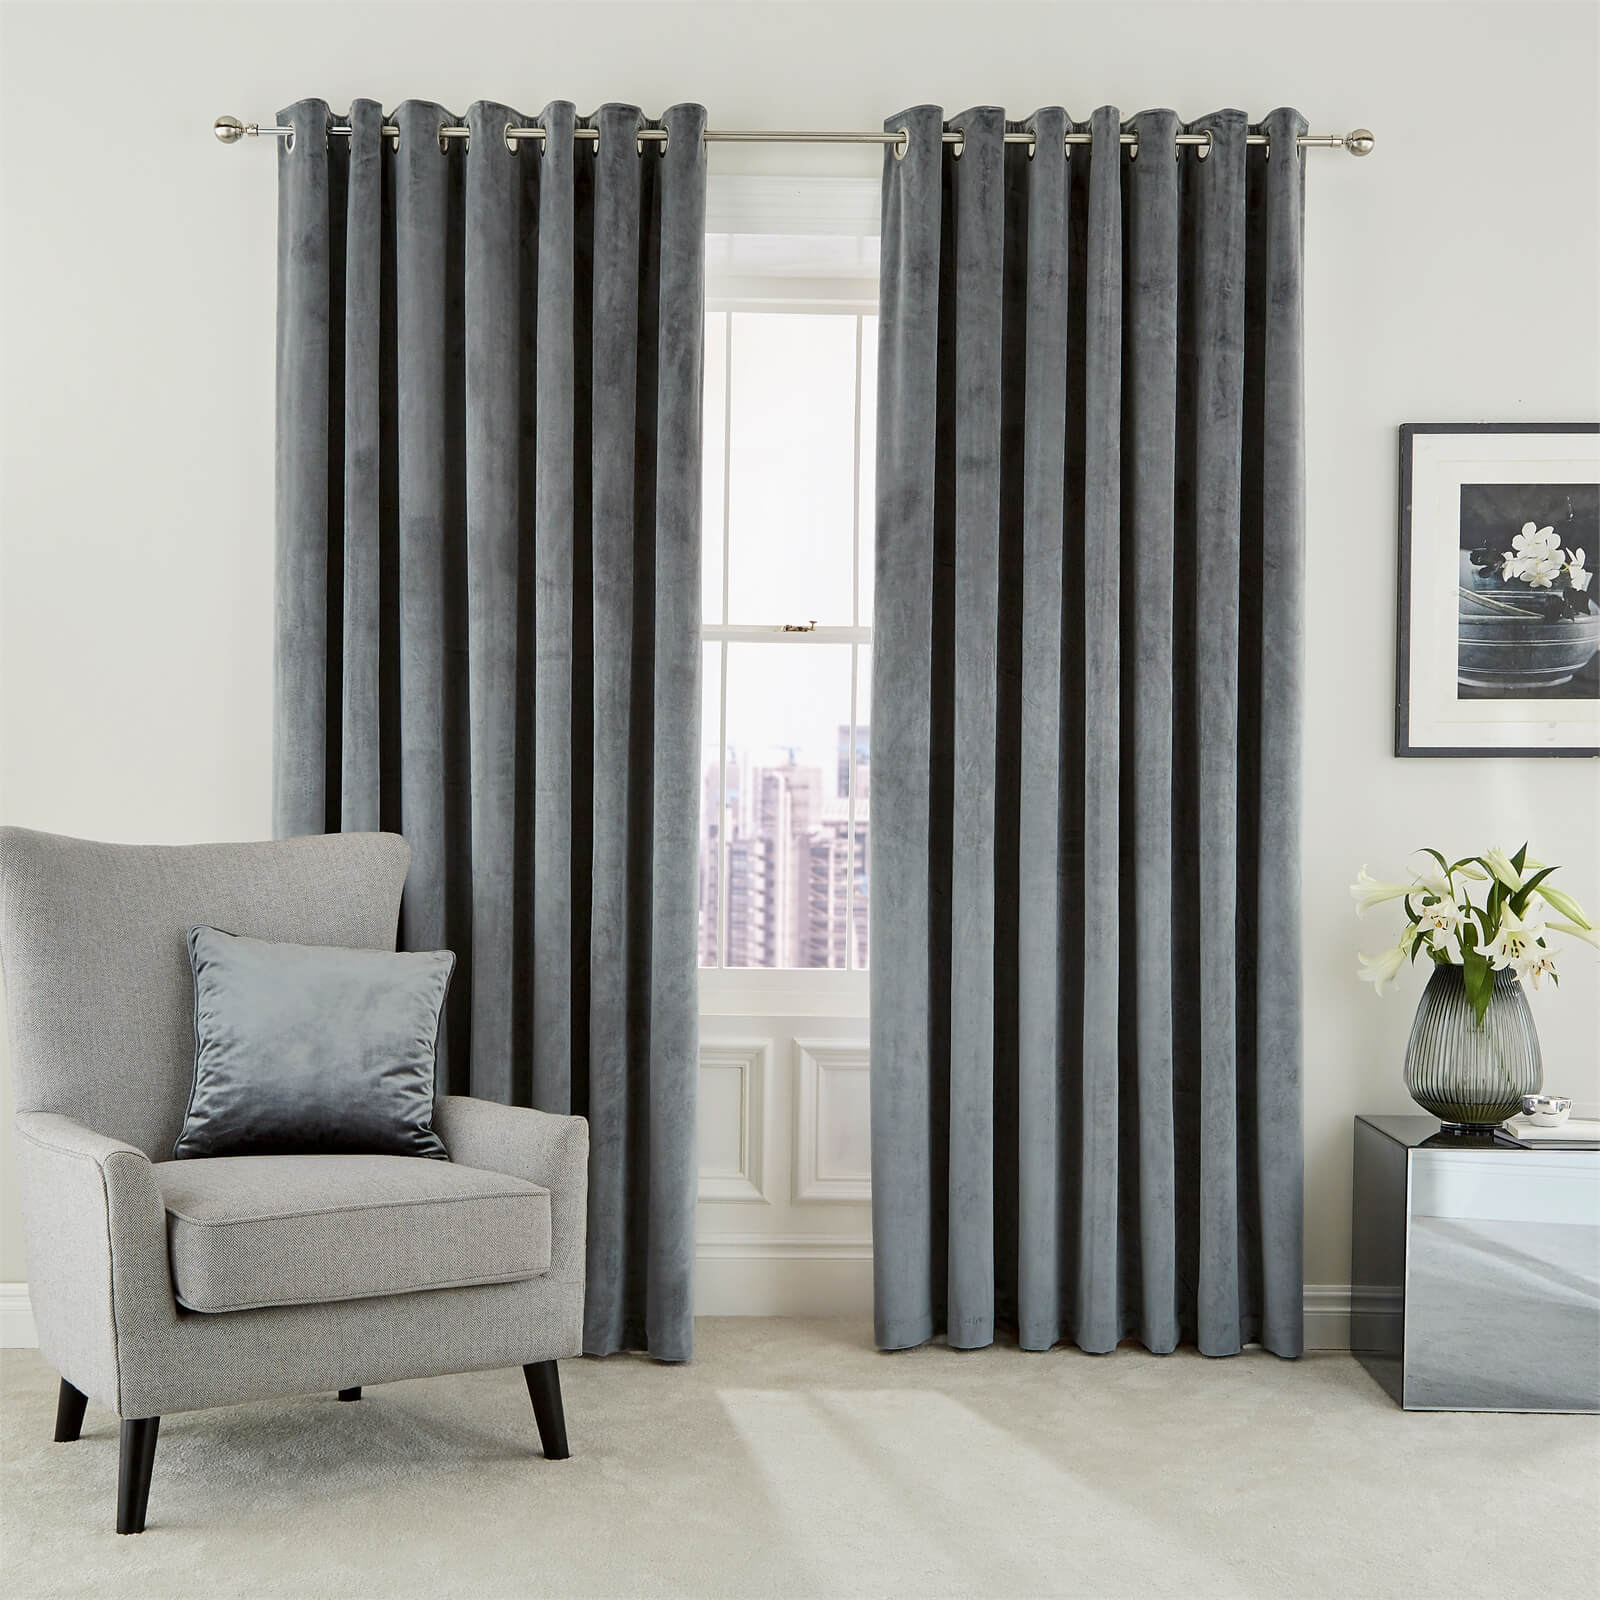 Peacock Blue Hotel Collection Escala Lined Curtains 66 x 72 - Steel